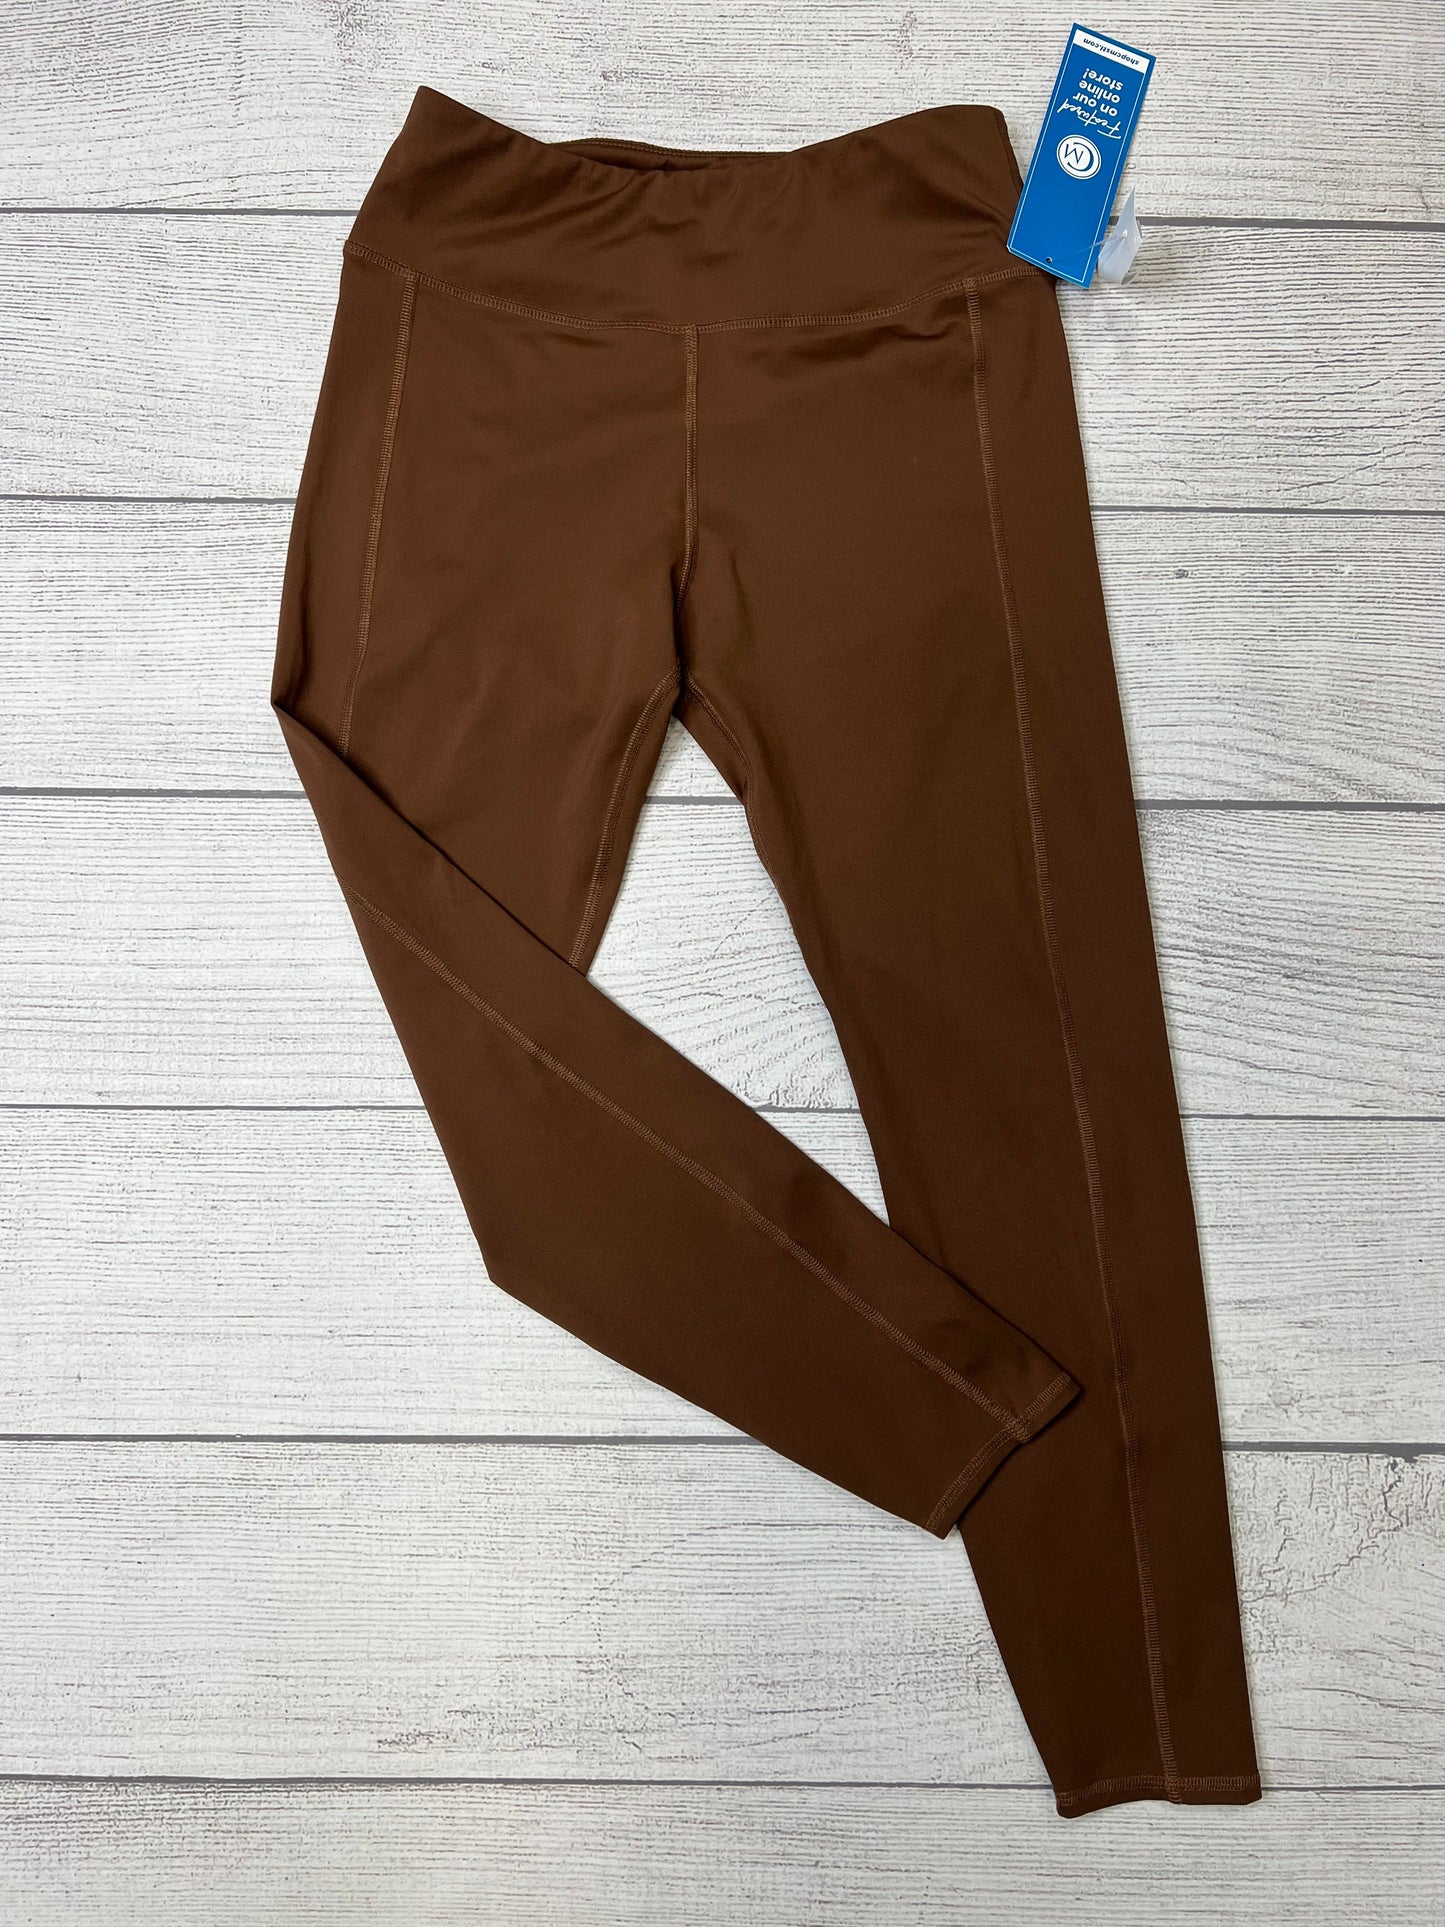 Brown Athletic Leggings Madewell, Size L